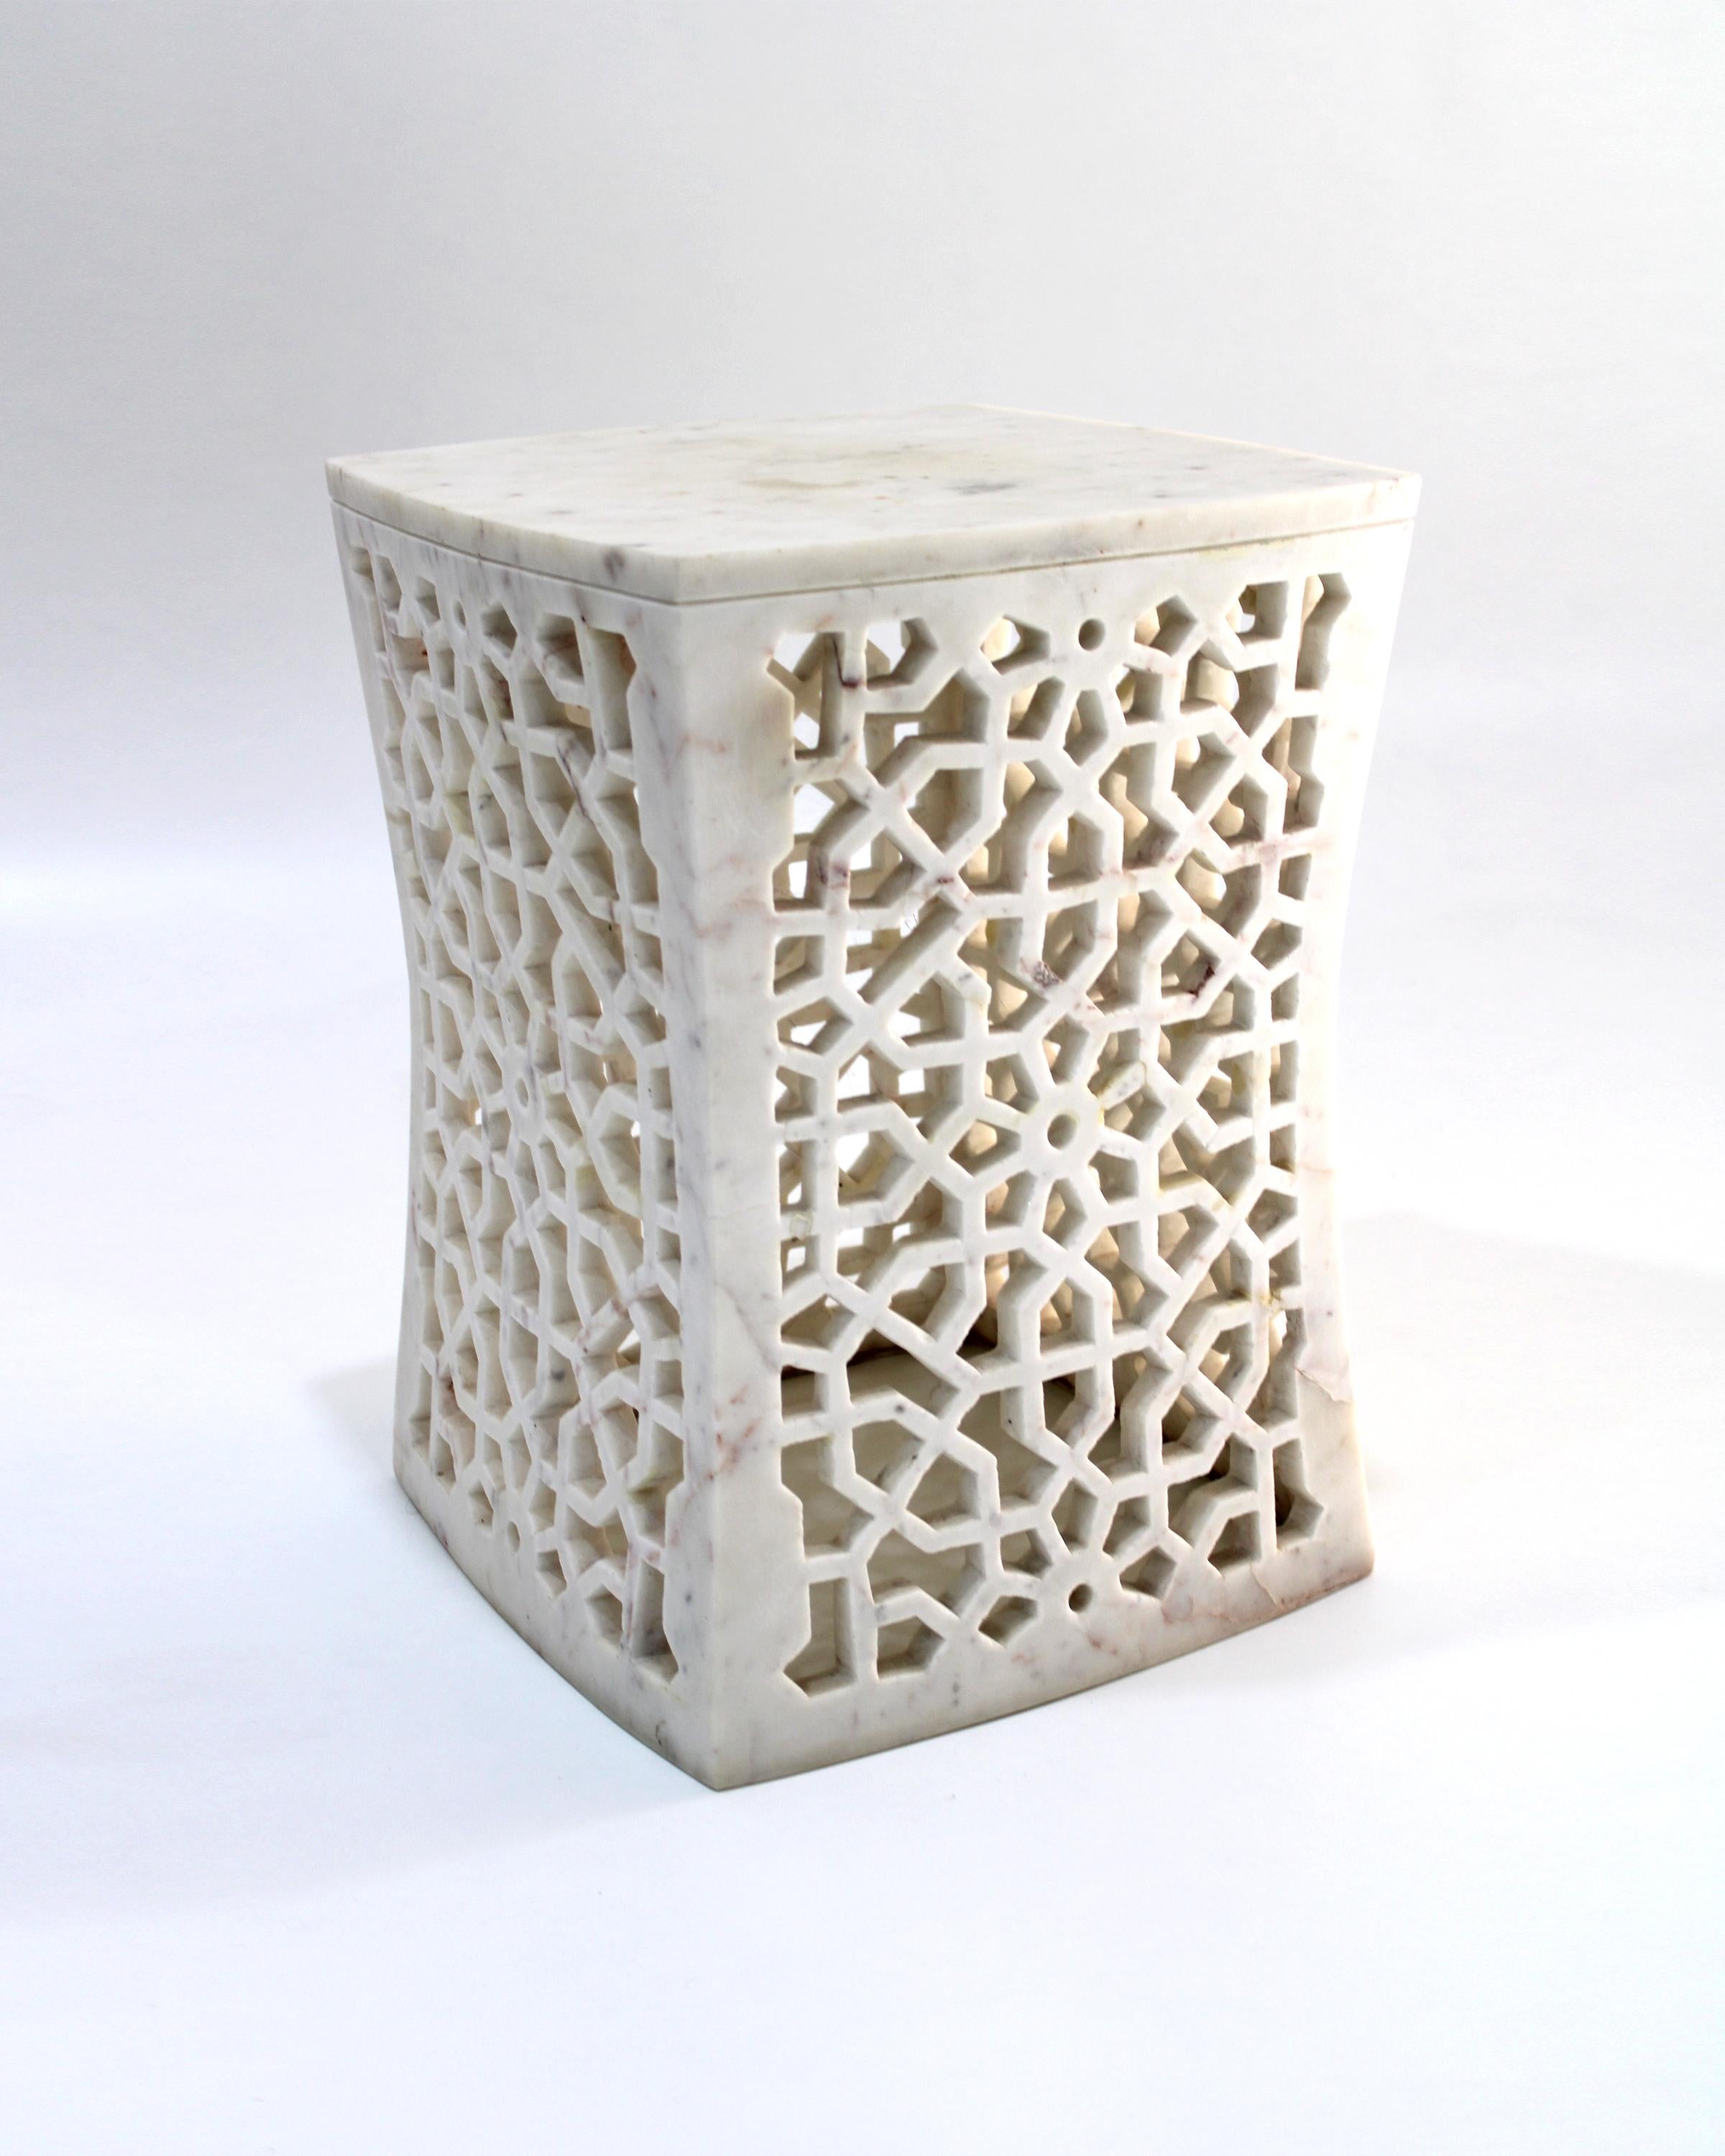 Jour Geometric Jali Side Table in White Marble by Paul Mathieu im Zustand „Neu“ im Angebot in New York, NY